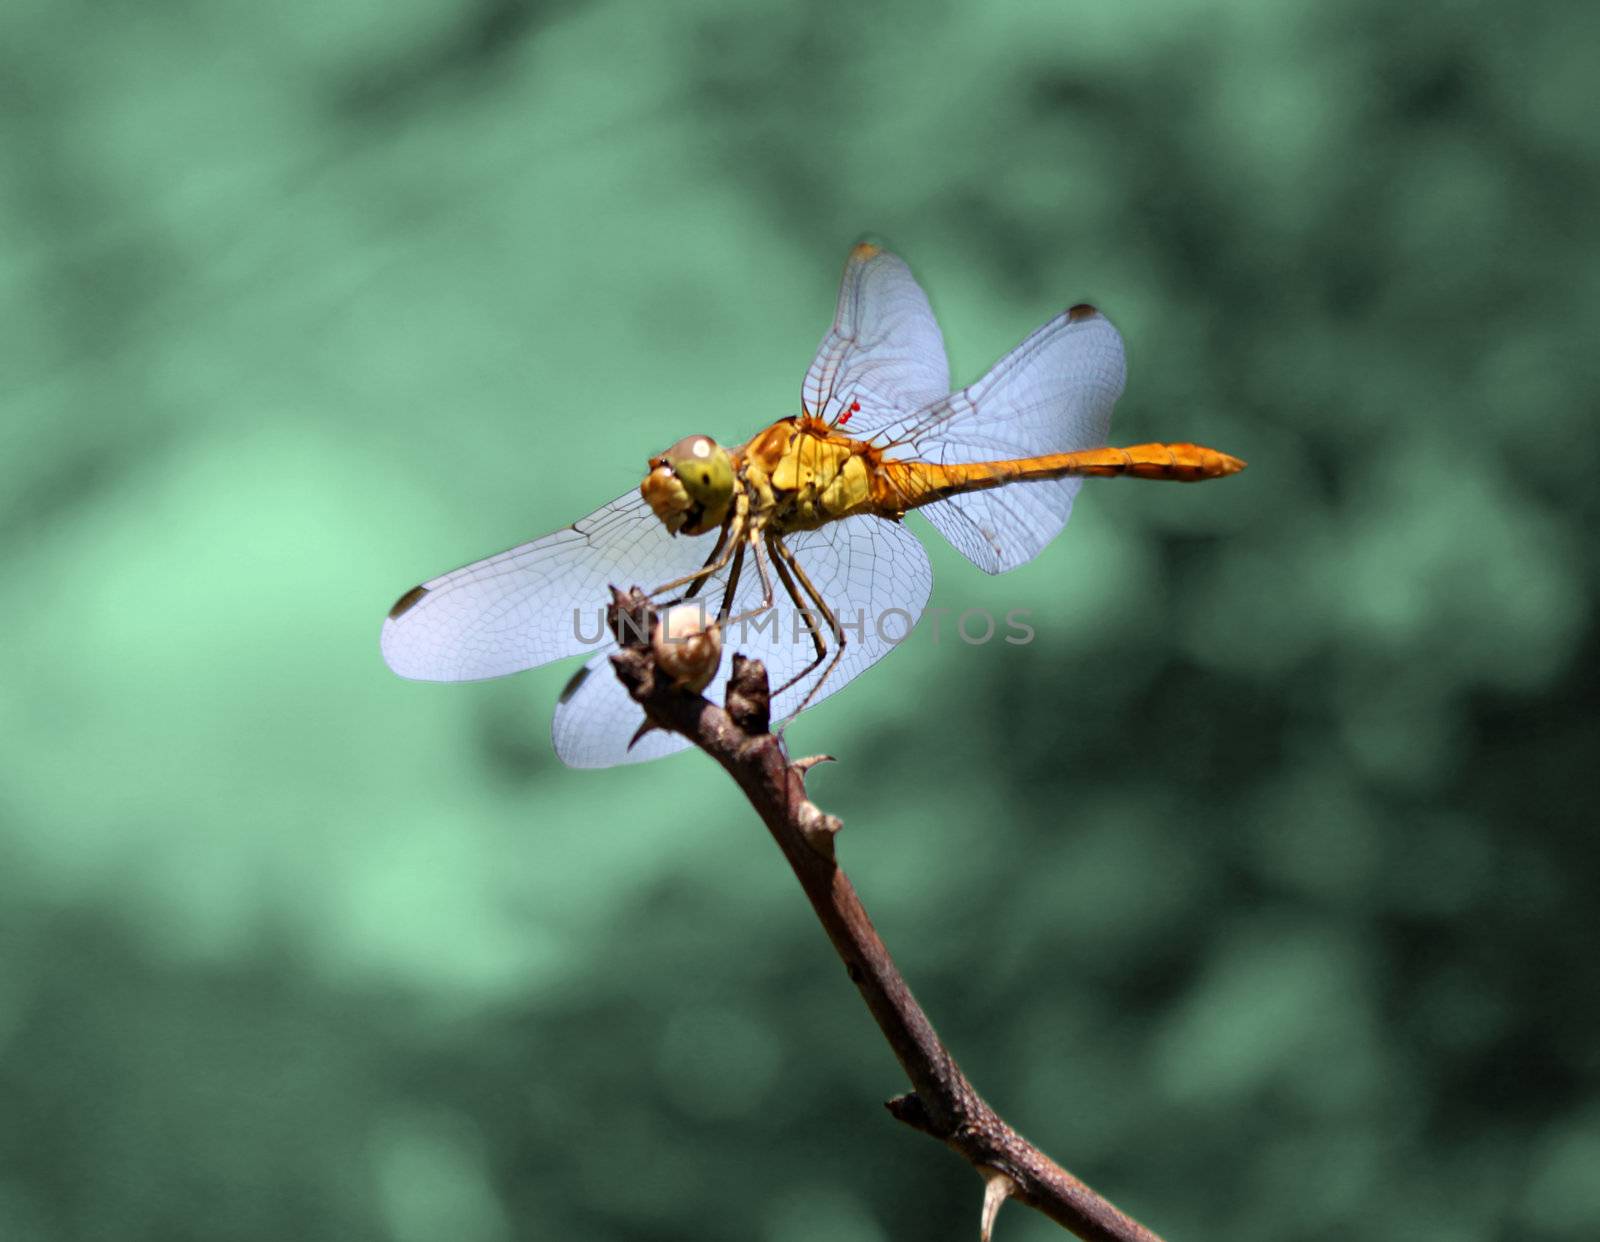 dragonfly on a branch over emerald background